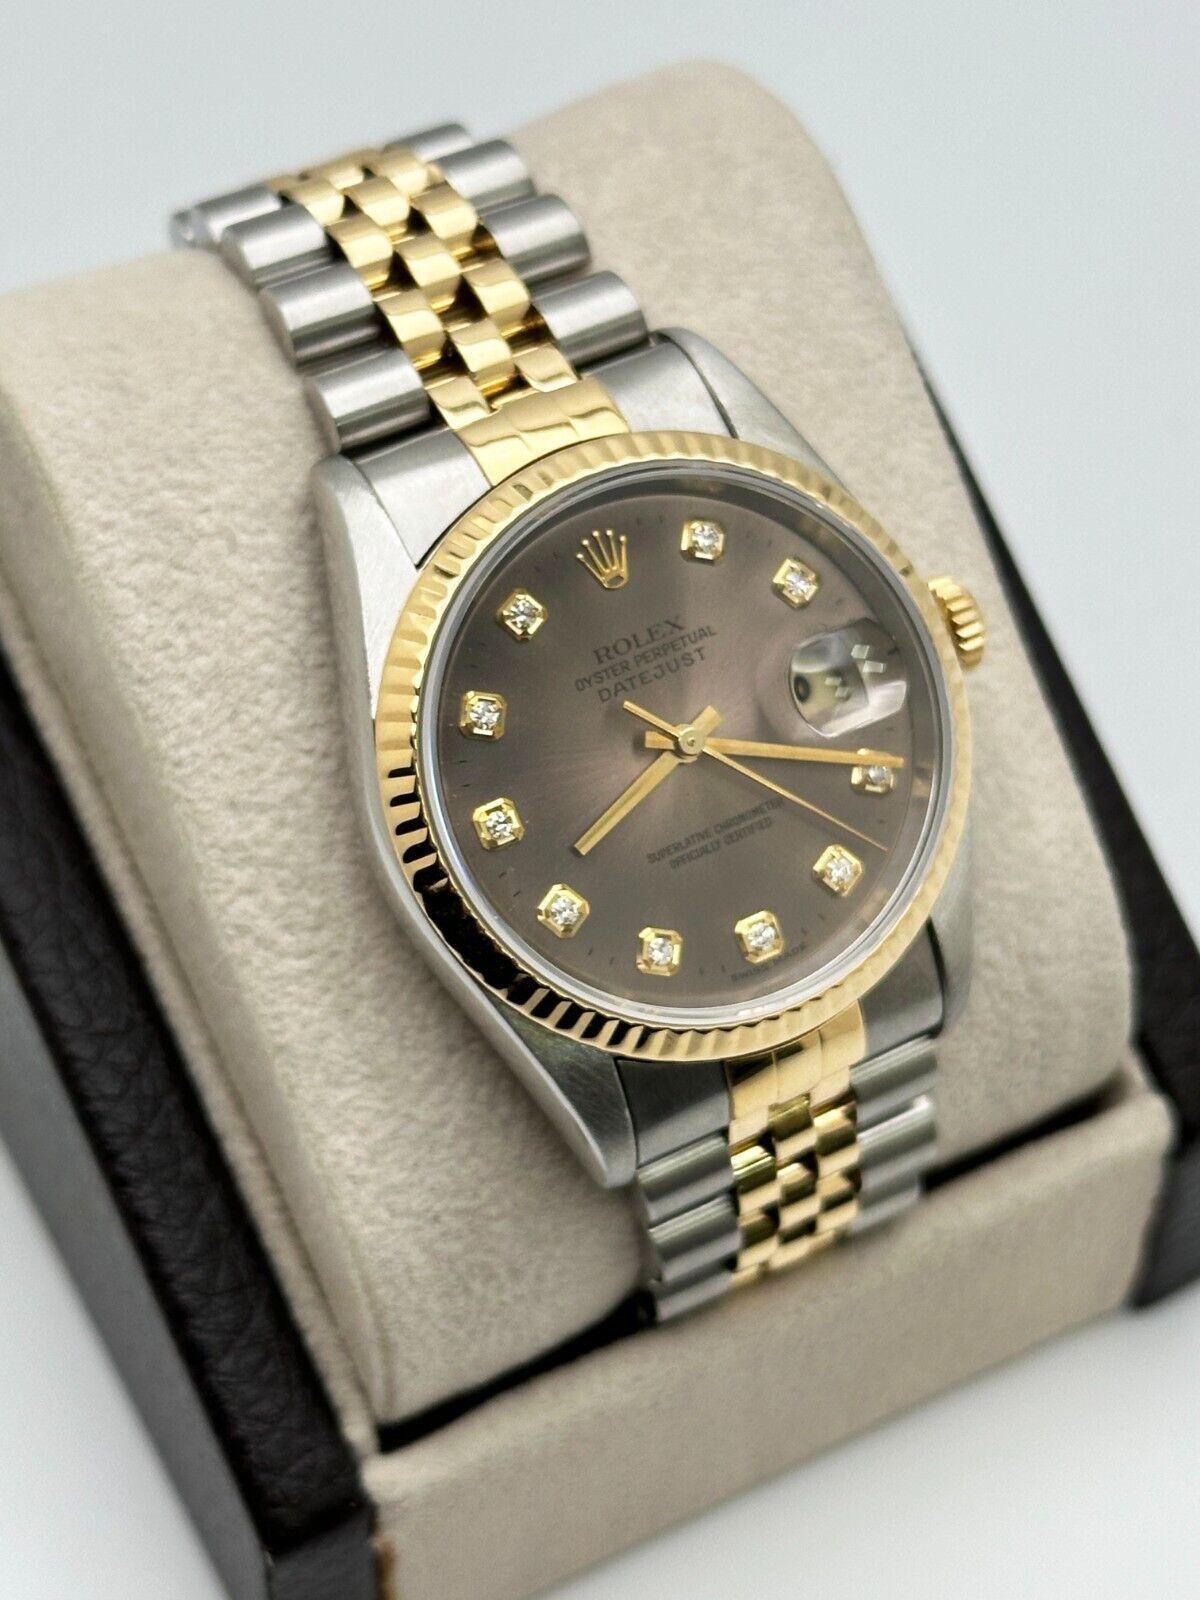 
Style Number: 16233



Serial: T295***



Year: 1995

 

Model: Datejust

 

Case Material: Stainless Steel

 

Band: 18K Yellow Gold & Stainless Steel 

  

Bezel: 18K Yellow Gold 

  

Dial: Factory Diamond Dial - Dial is original and has